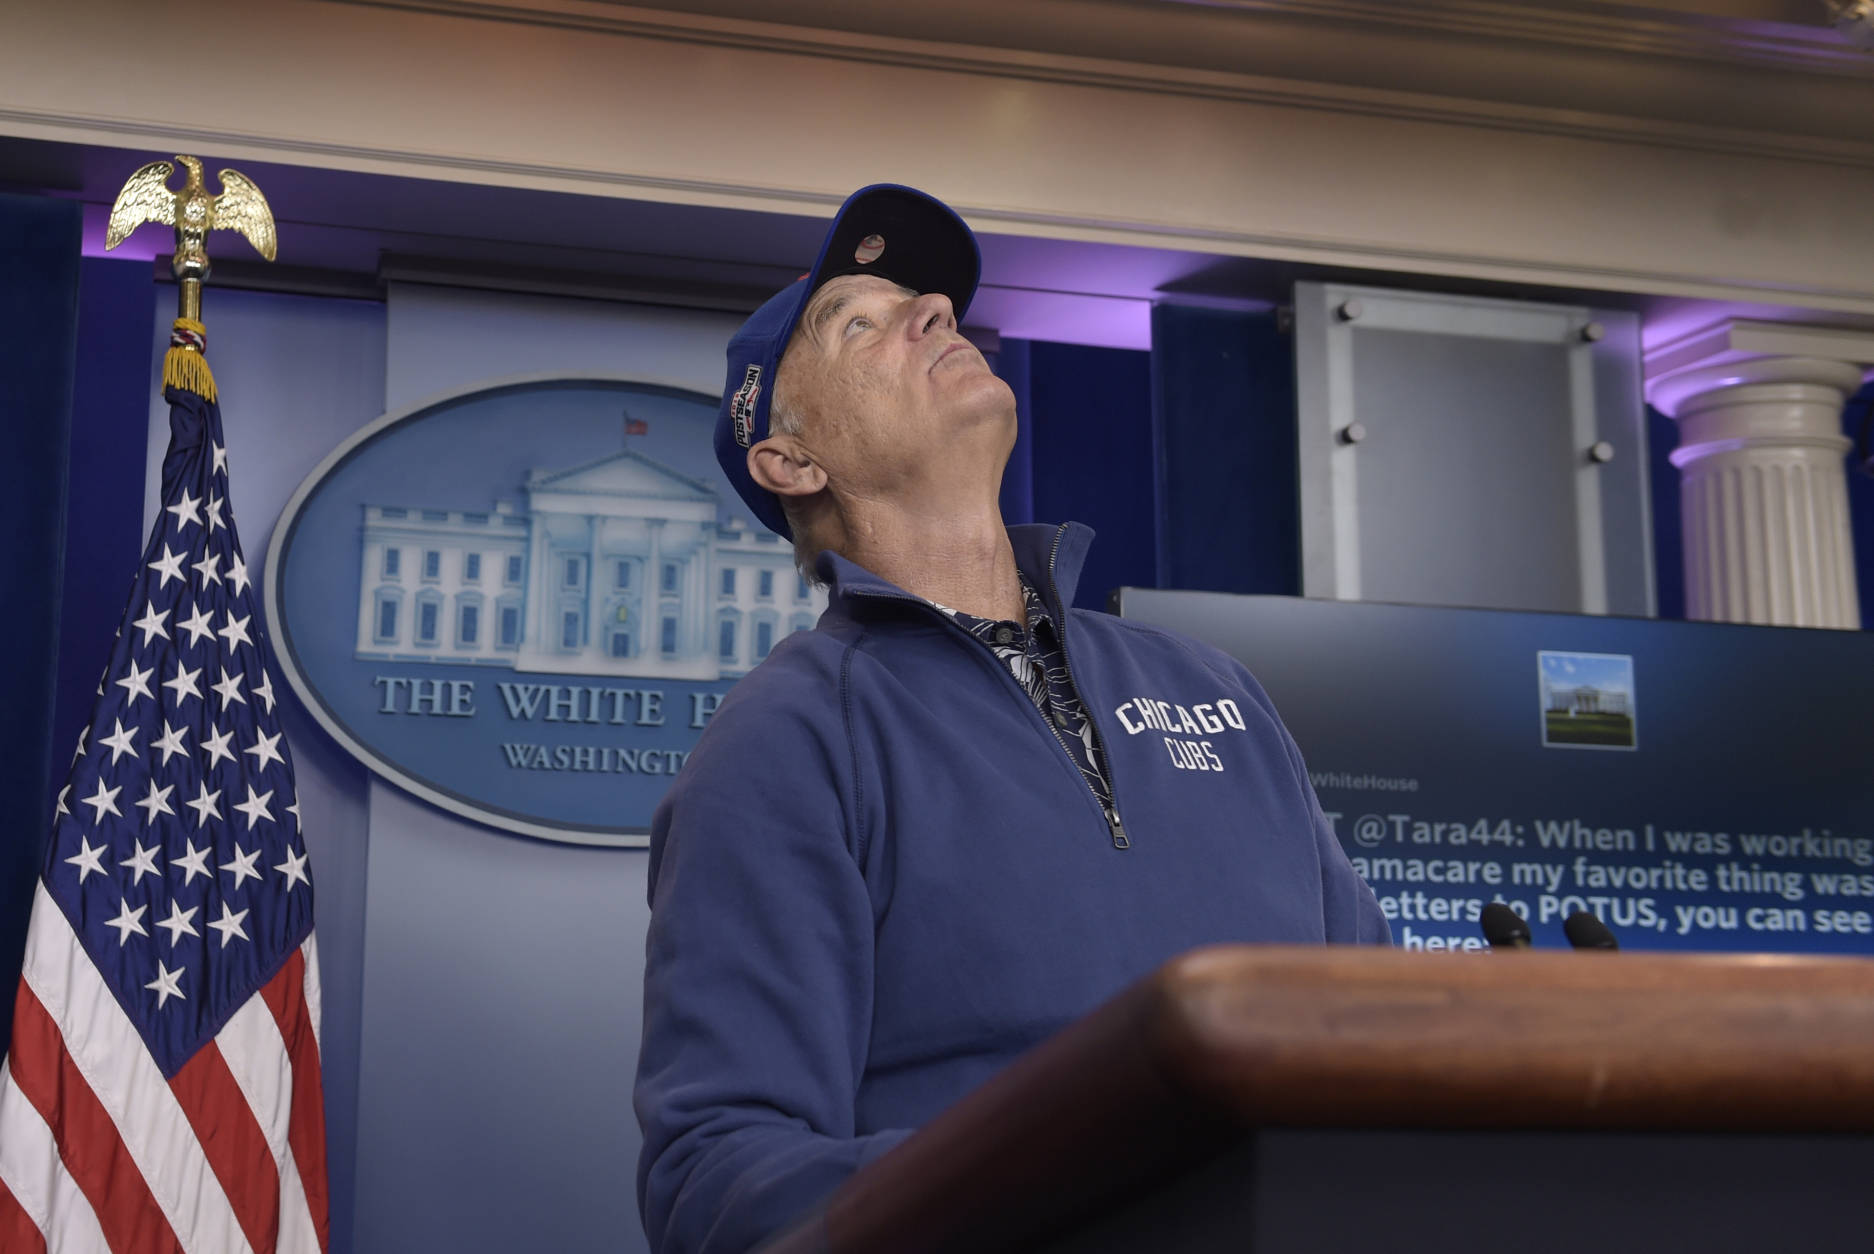 Actor Bill Murray visits the White House briefing room in Washington, Friday, Oct. 21, 2016. Murray is in Washington to receive the Mark Twain Prize for American Humor. (AP Photo/Susan Walsh)